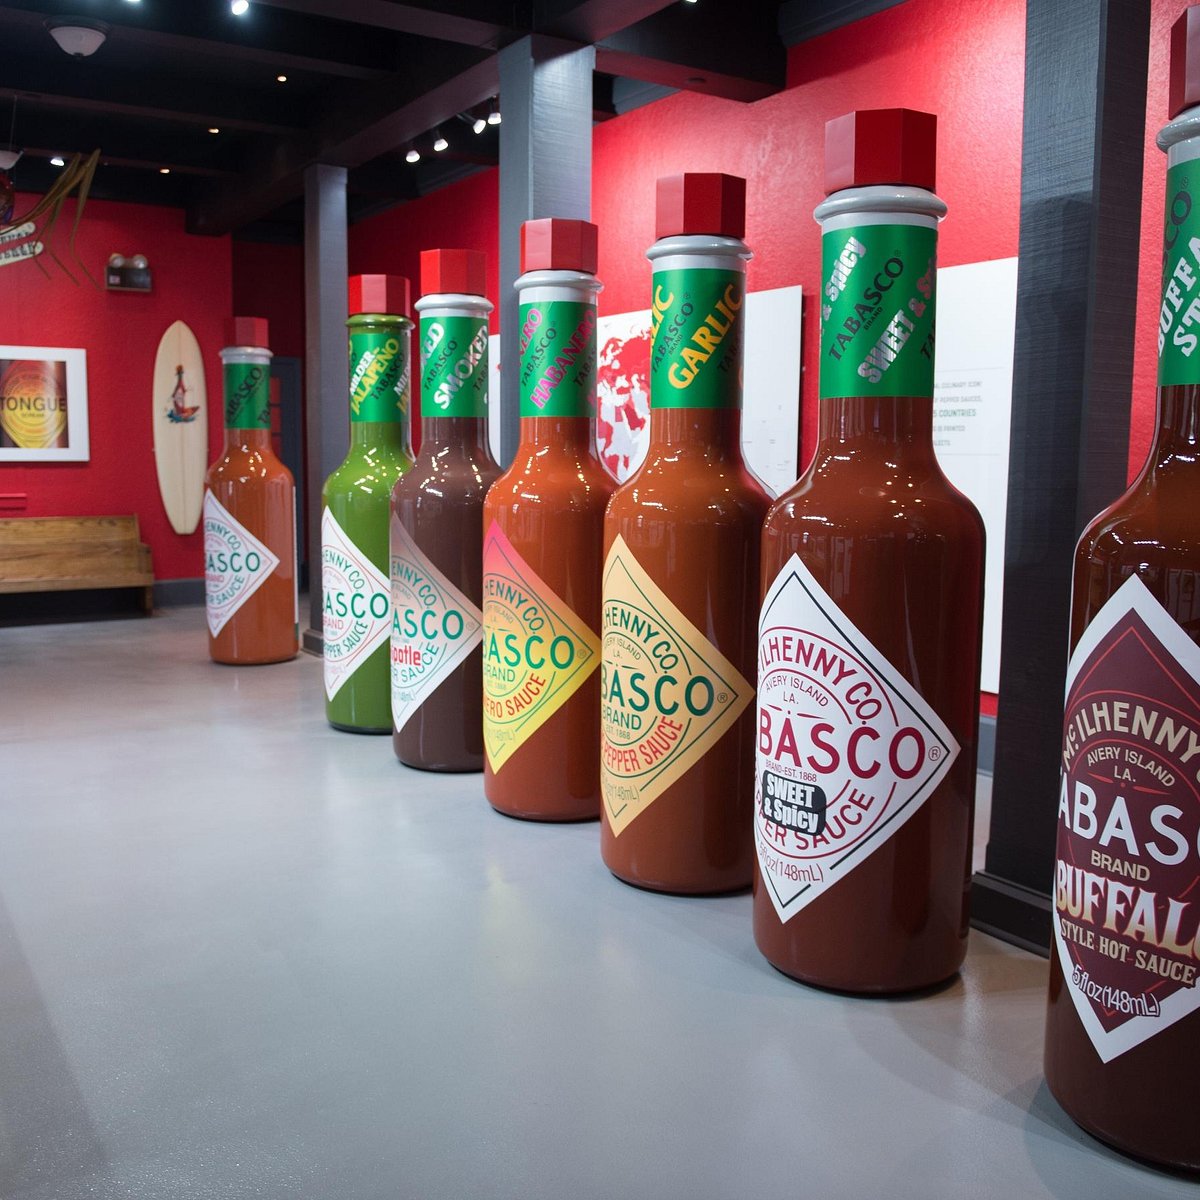 Fun Facts to Know About Tabasco Hot Sauce